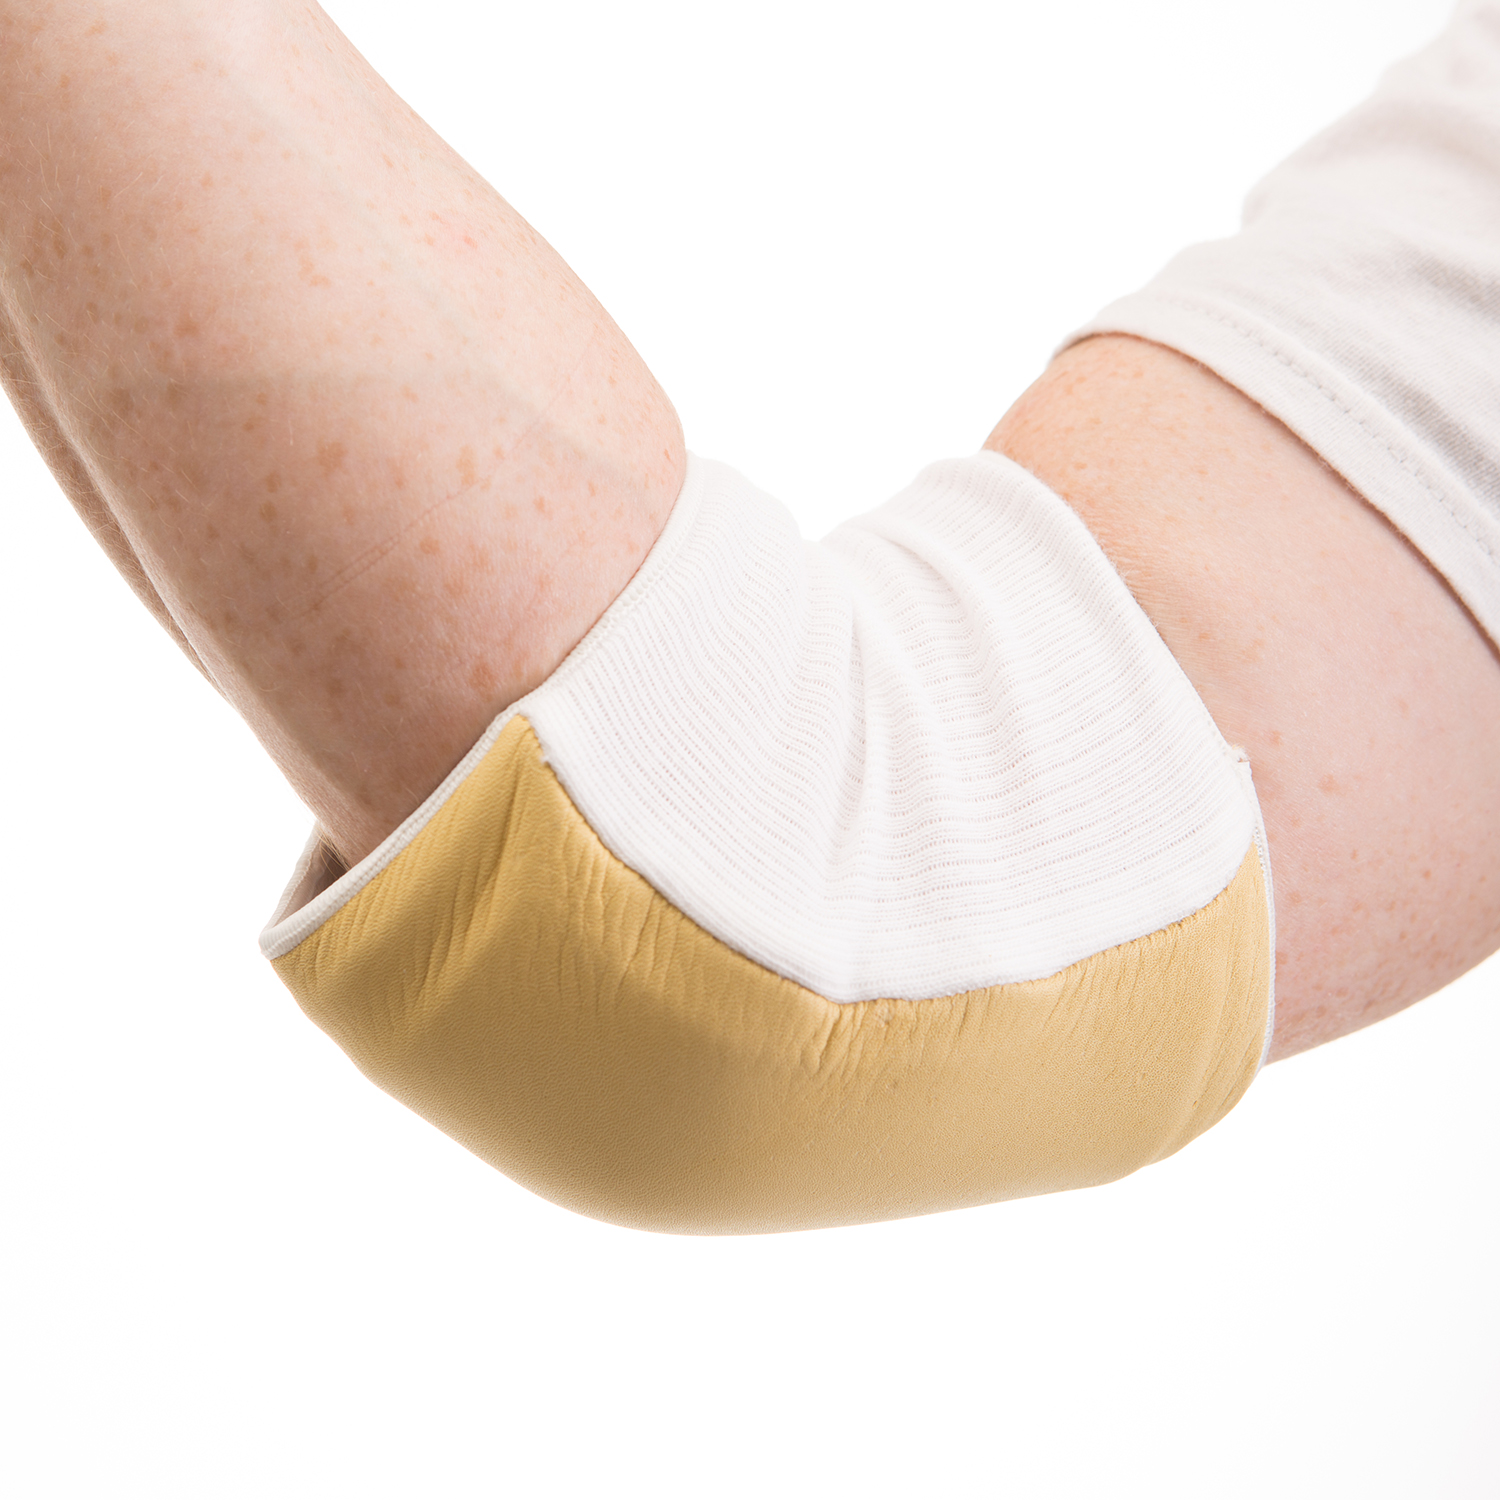 IMPACTO 806-20S ELBOW PAD IMPACT SUEDE PULL ON VEP FOAM